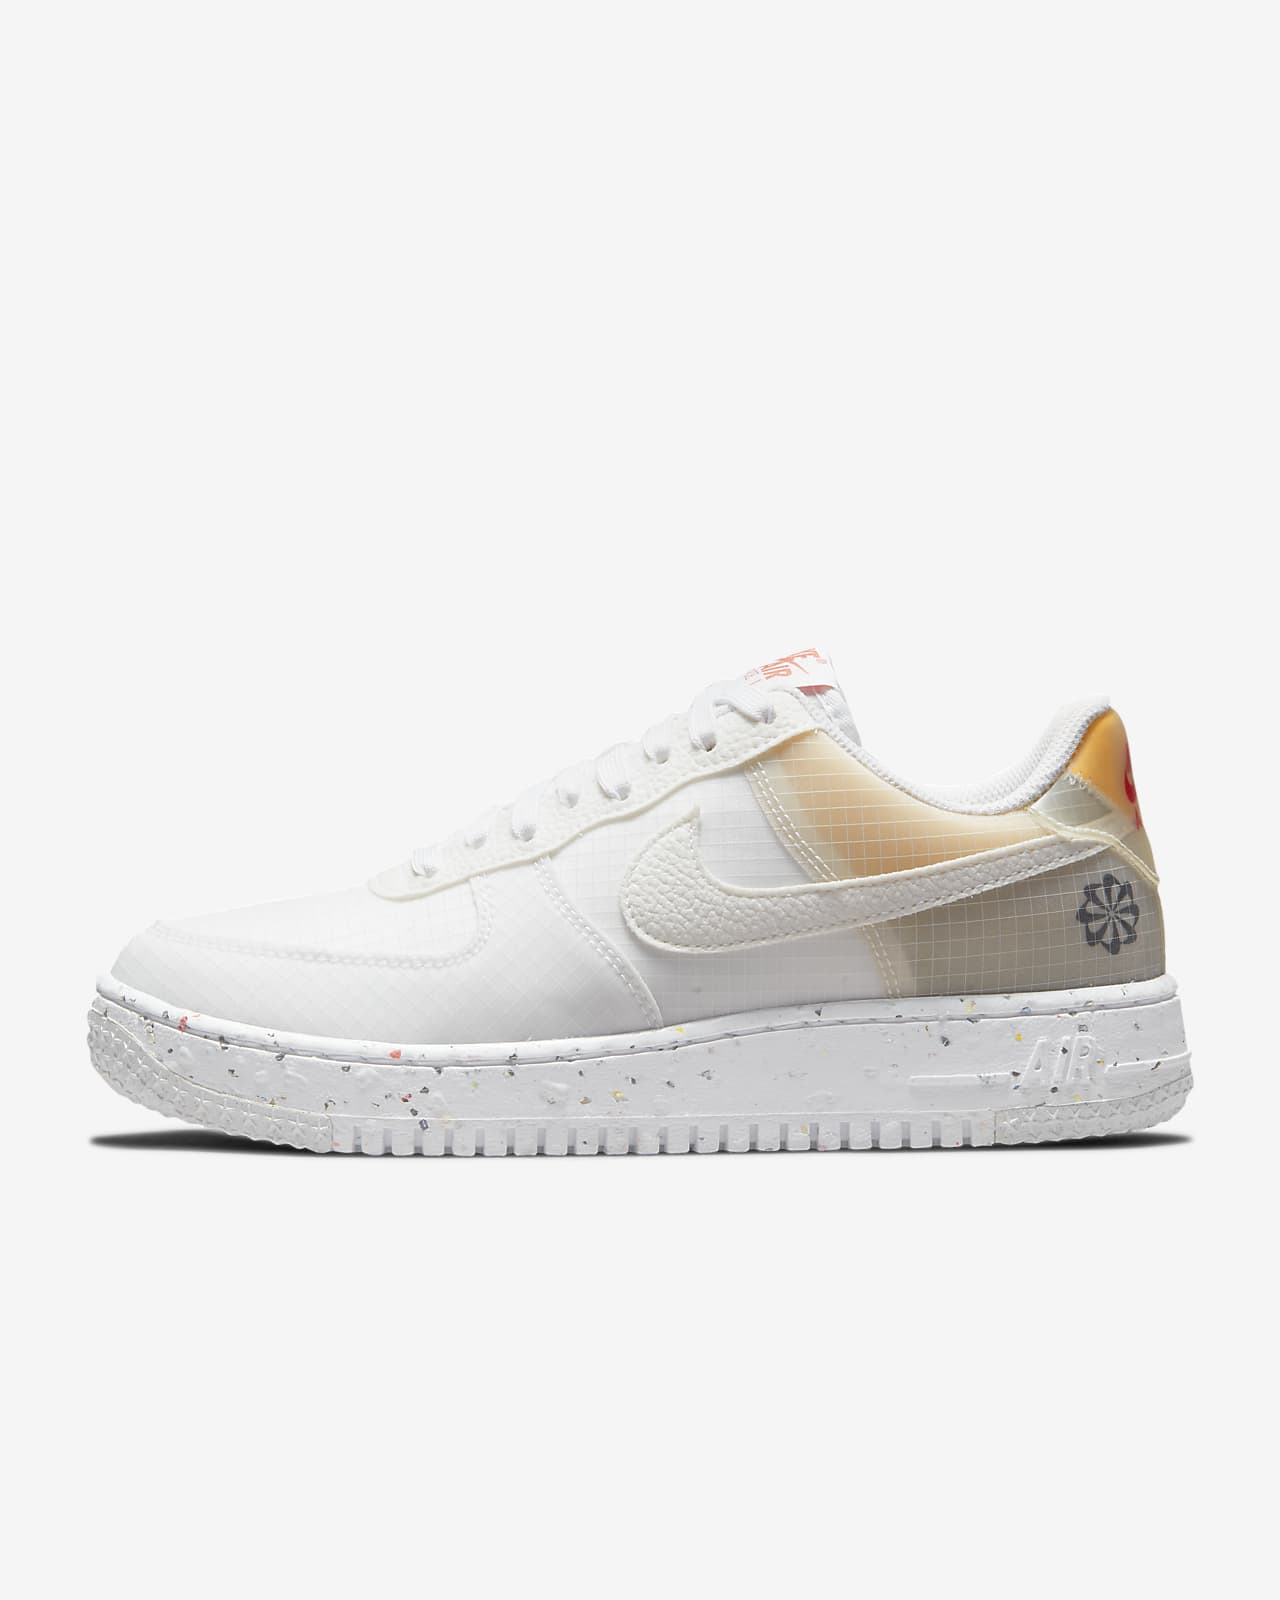 Chaussure Nike Air Force 1 Crater pour Femme. Nike LU